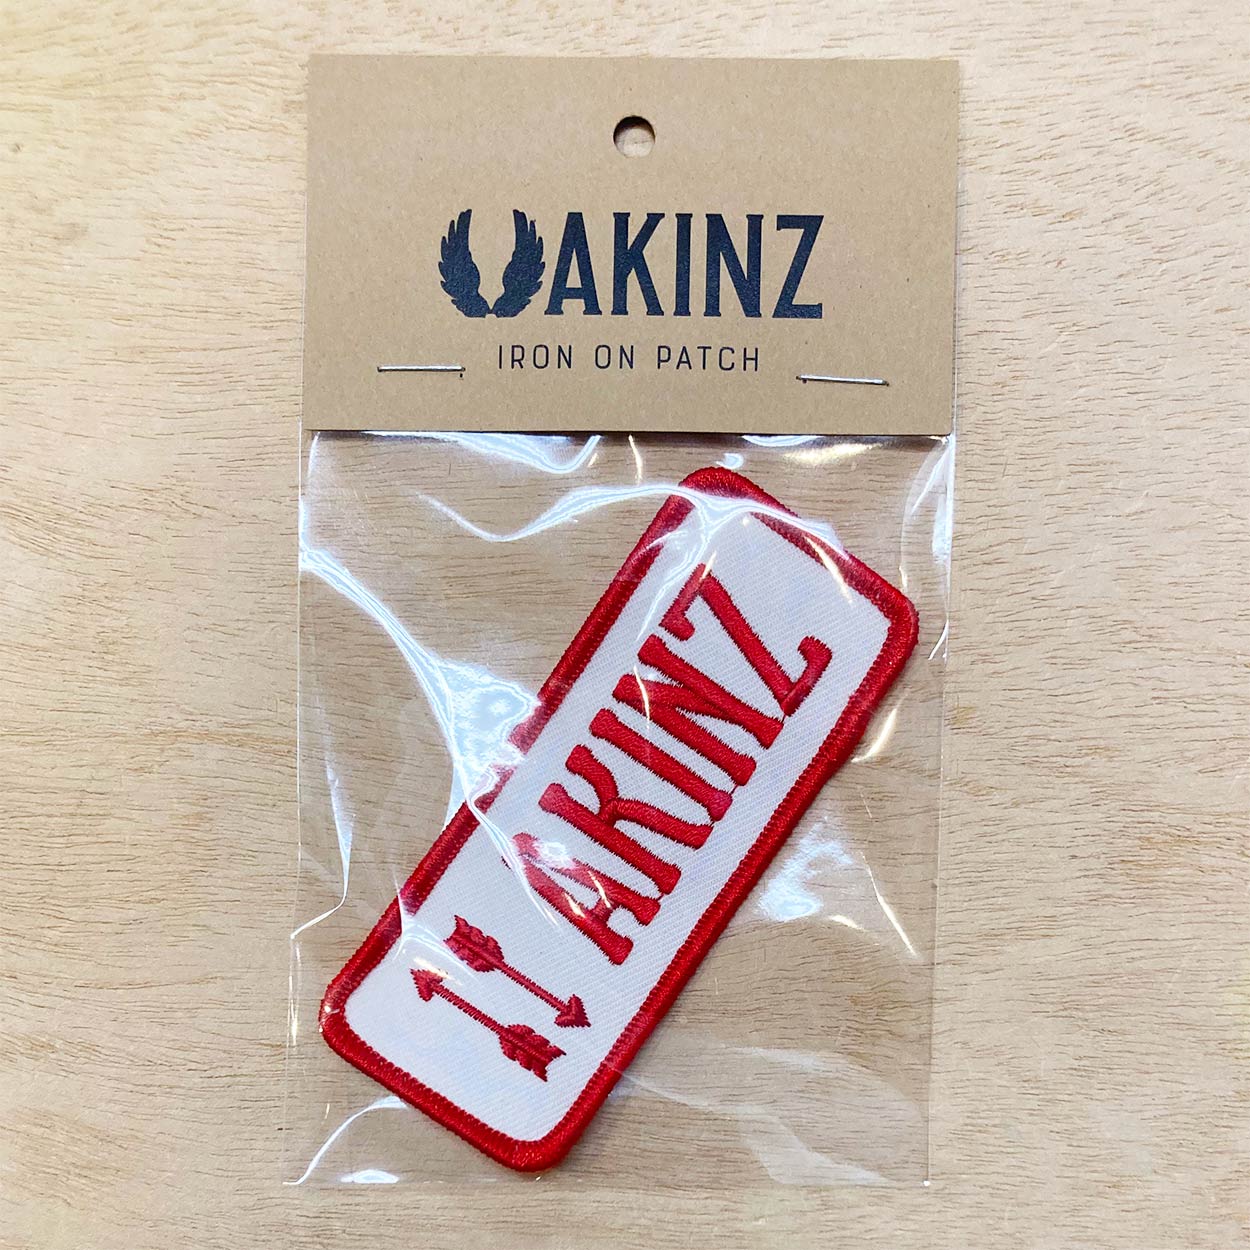 Red-Akinz-Iron-On-Patch-in-bag.jpg